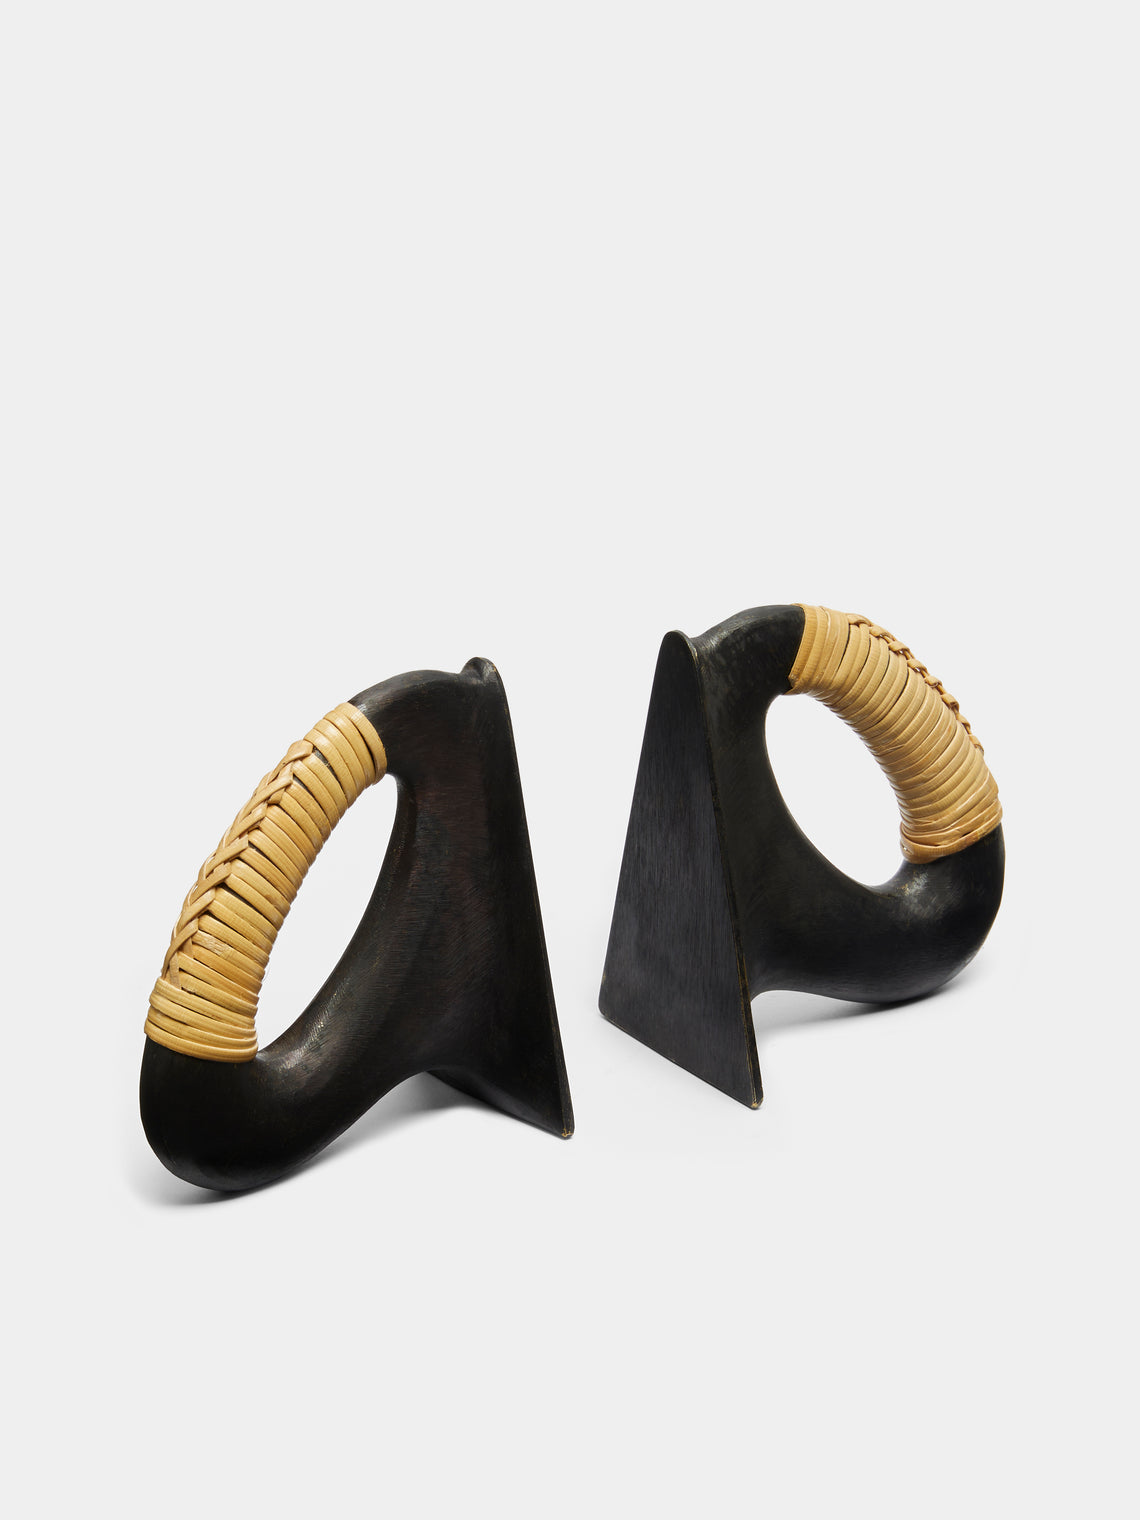 Carl Auböck - Flatiron Brass and Cane Bookends - Black - ABASK